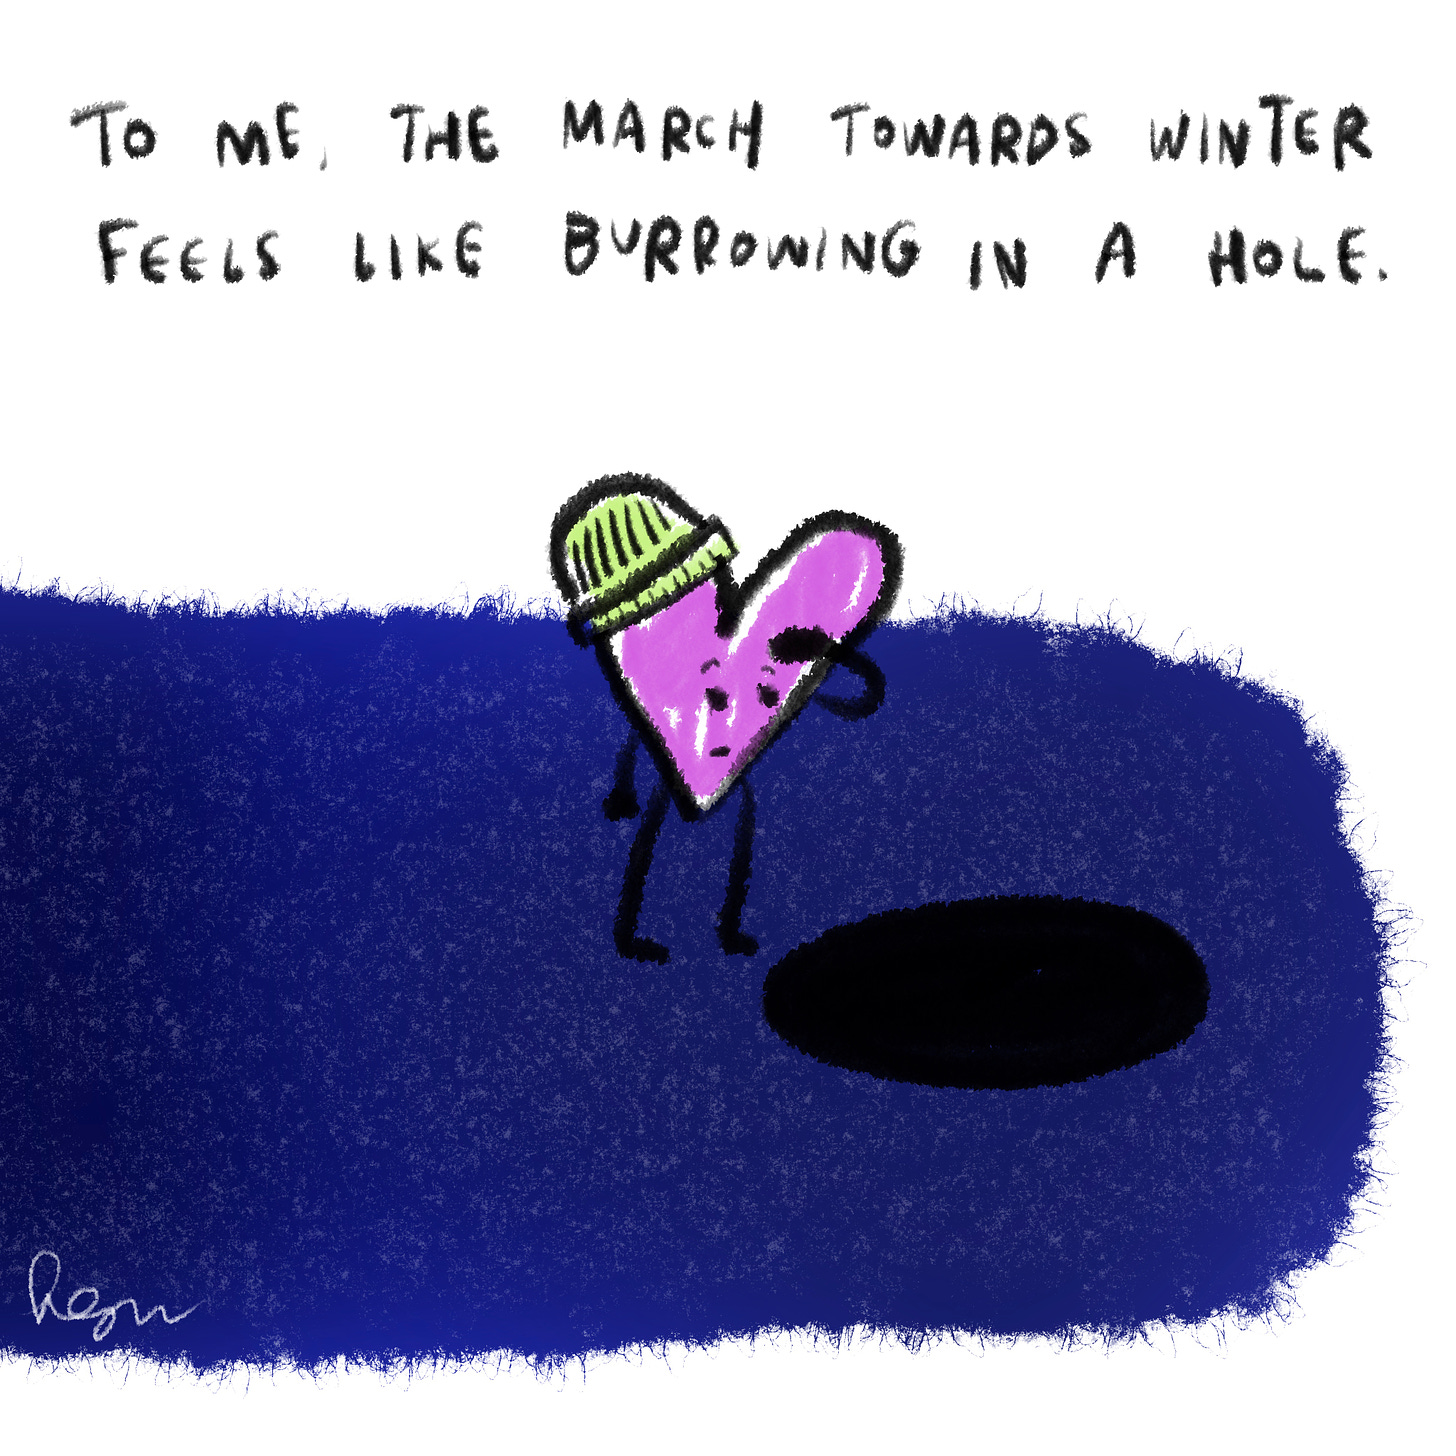 To me, the march towards winter feels like burrowing a hole. 